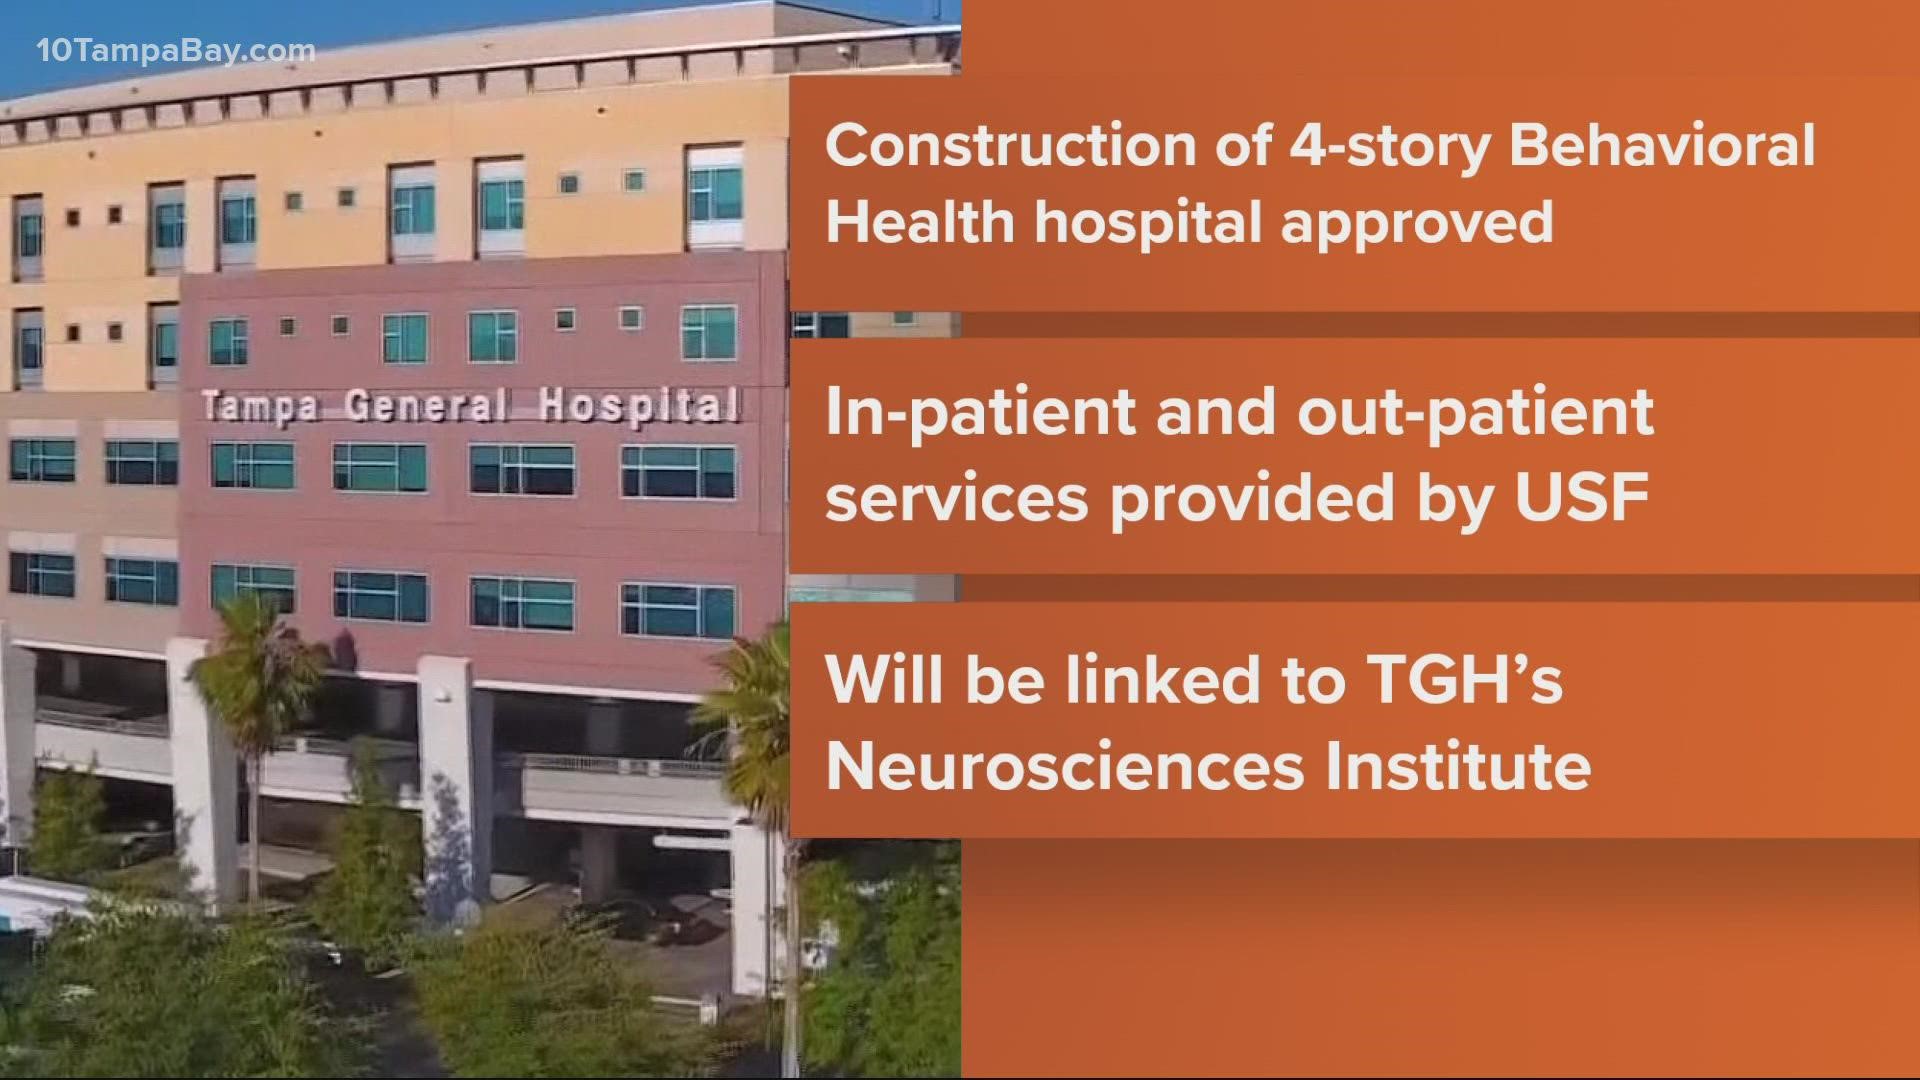 The facility will provide initial emergent evaluations for patients going through a behavioral health crisis.